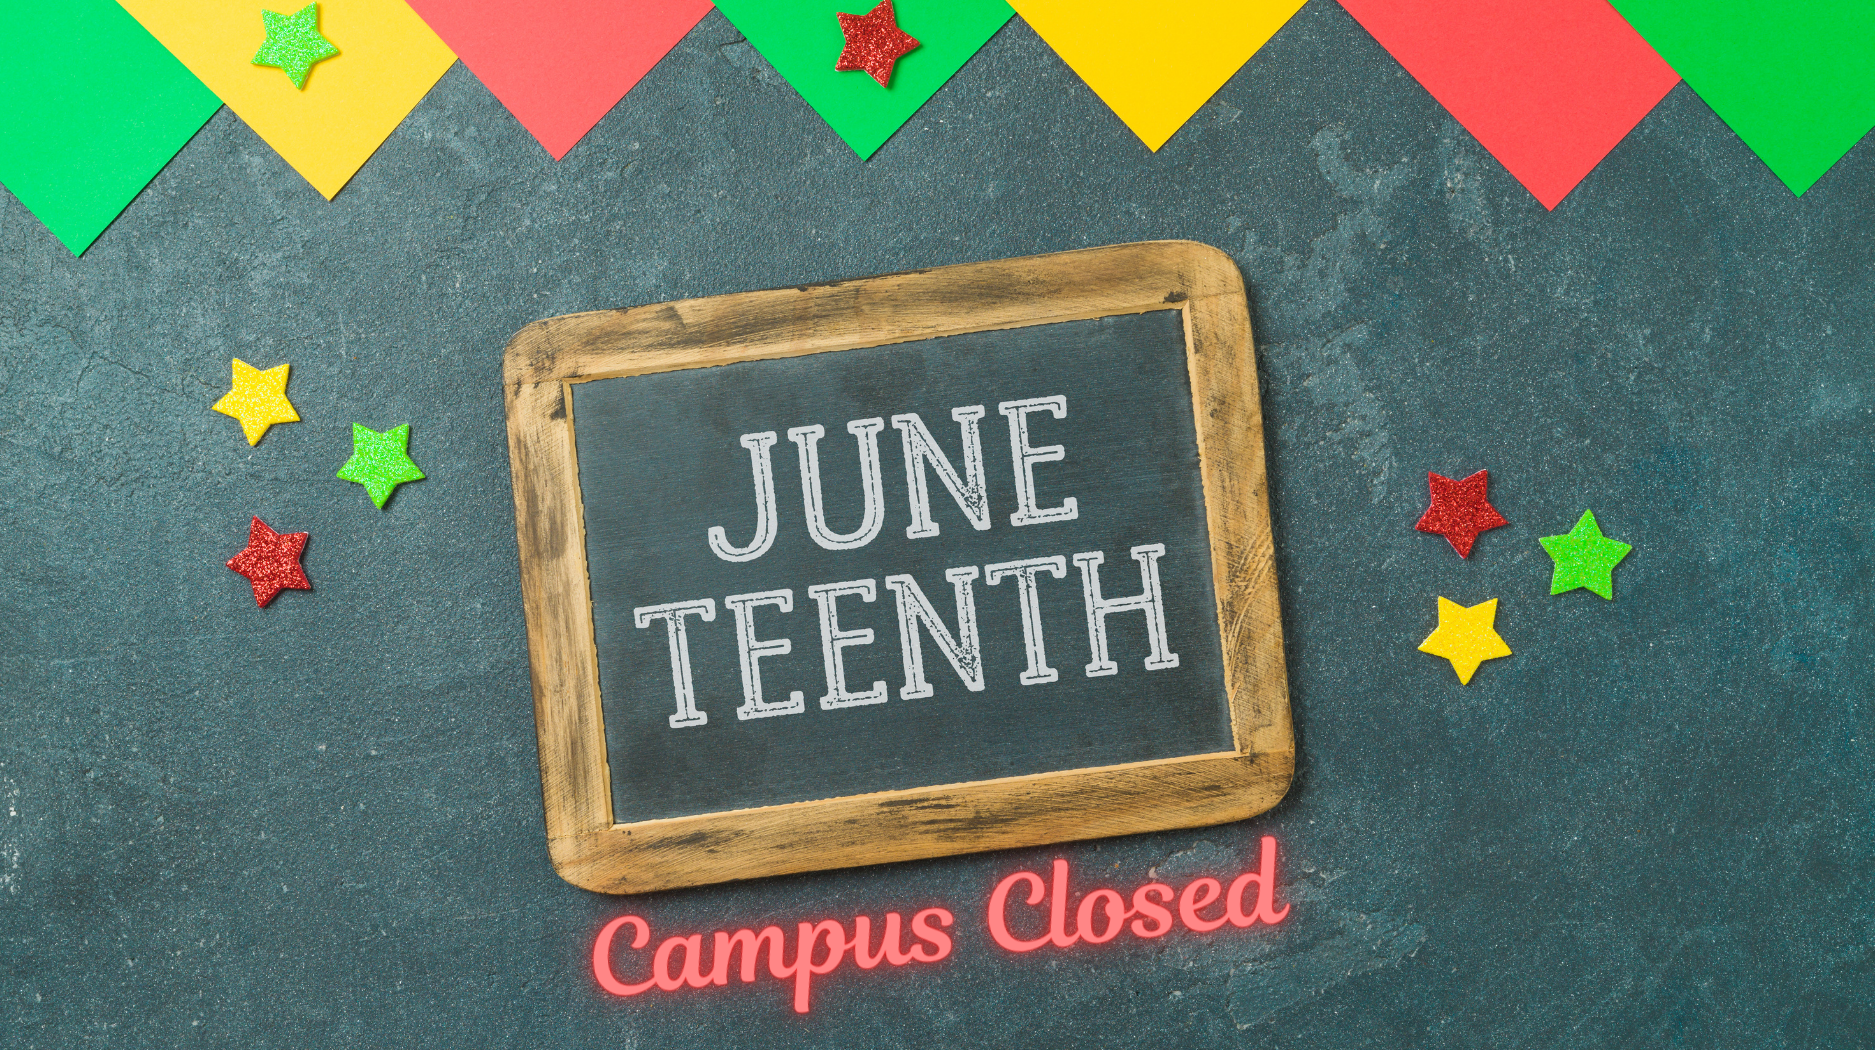 Graphic saying "JUNE TEENTH" and Campus Closed